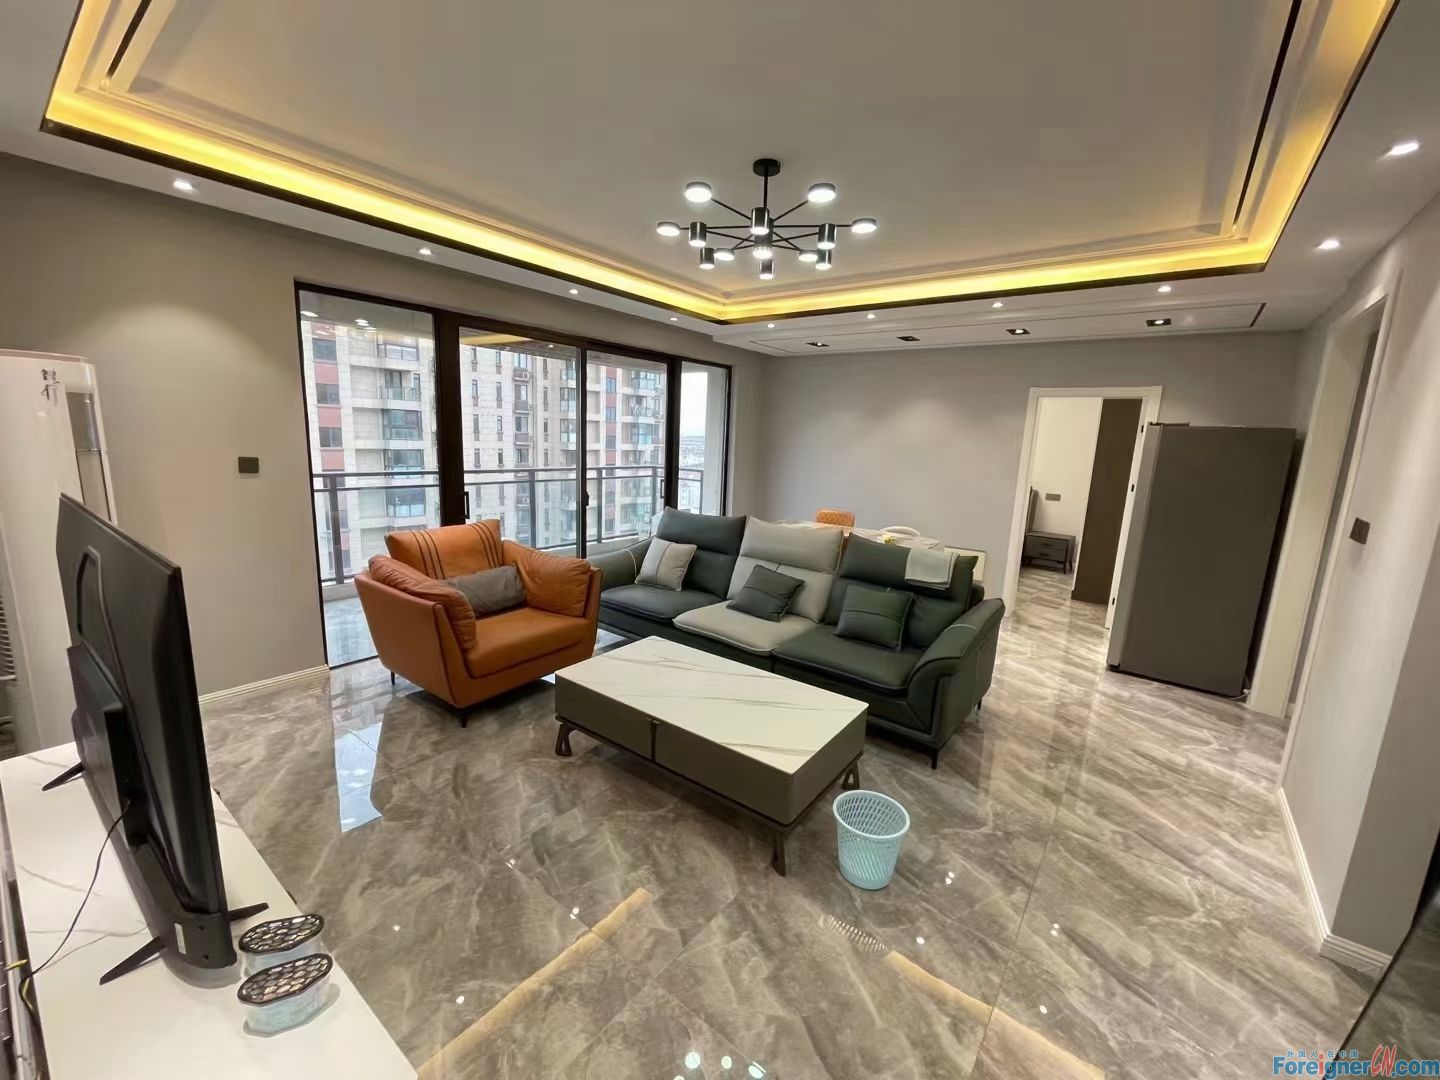 Stunning!! Find a Place in Suzhou / nice Apartment/3 bedrooms,2 baths/with a big Balcony/Nearby XieTang Town,shopping Plaza/ close to internatioanl schools SSIS, Dulwish, and OCAC